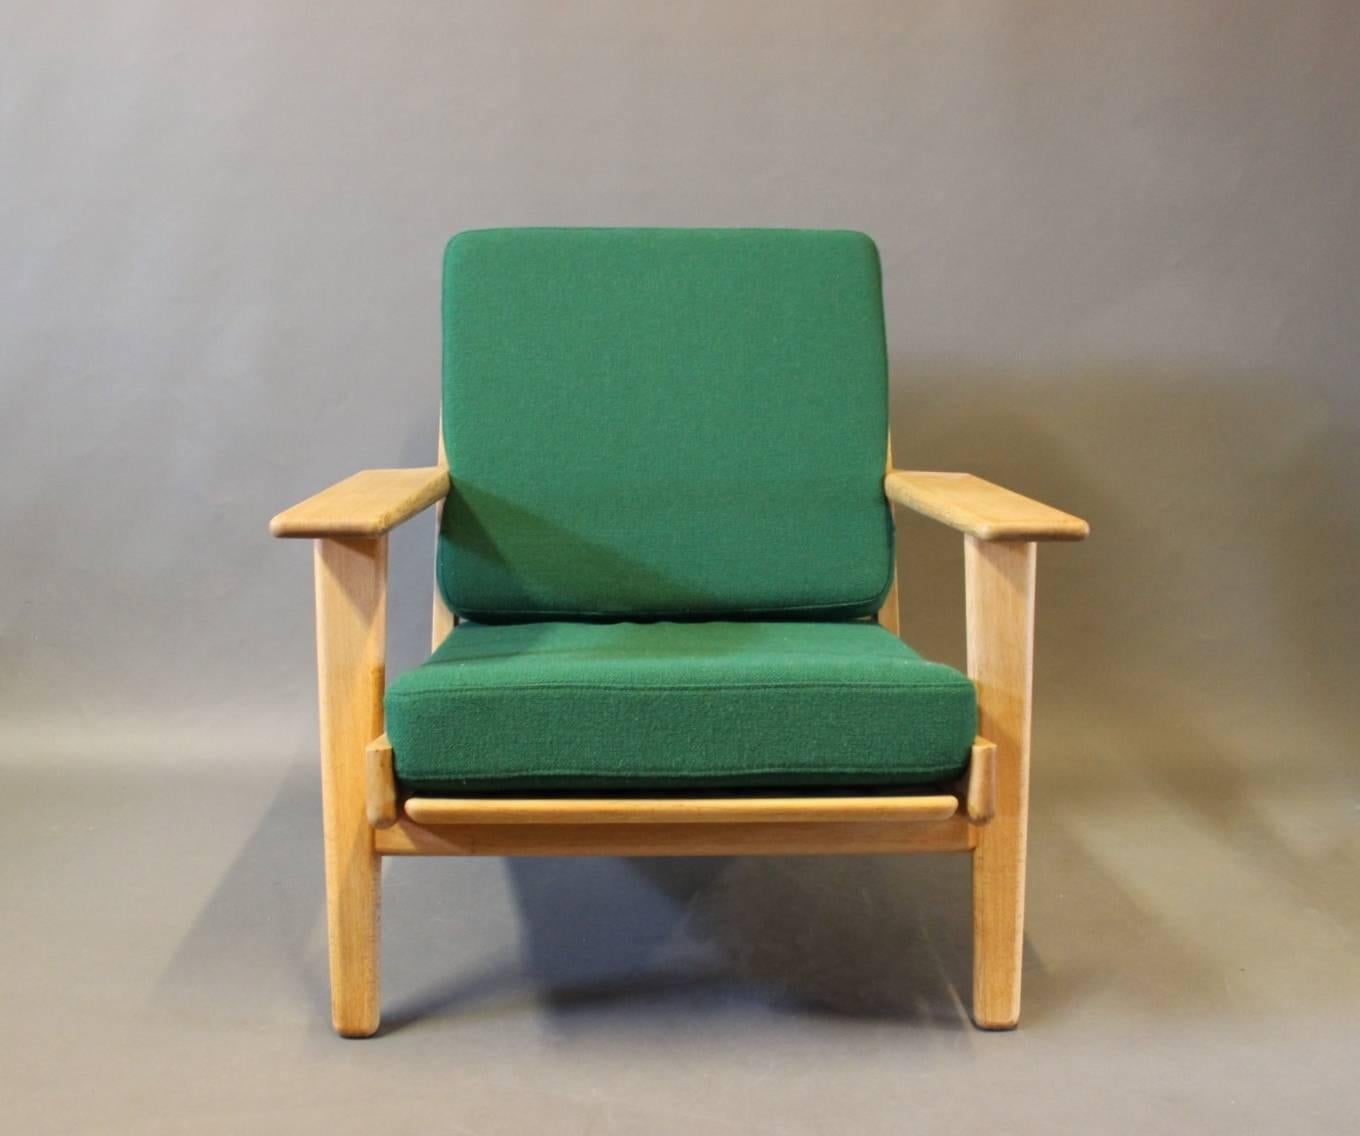 Armchair, model GE290, designed by Hans J. Wegner in the 1950s and manufactured by GETAMA in the 1960s. The chair is of oak and with cushions upholstered in dark green Hallingdal wool.